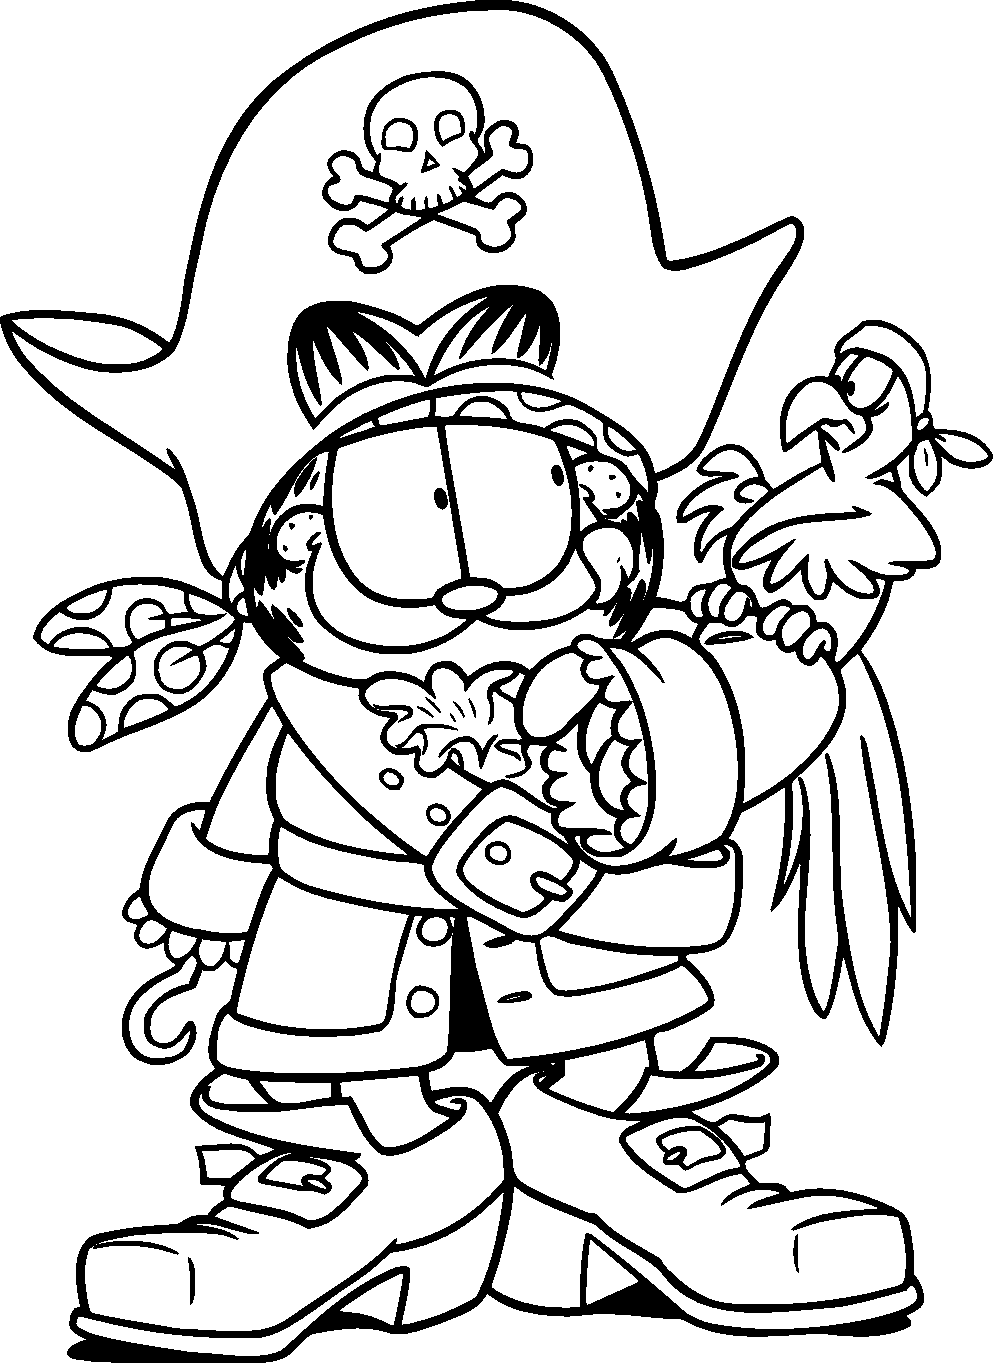 Free Coloring Pages Of Garfield - boringpop.com